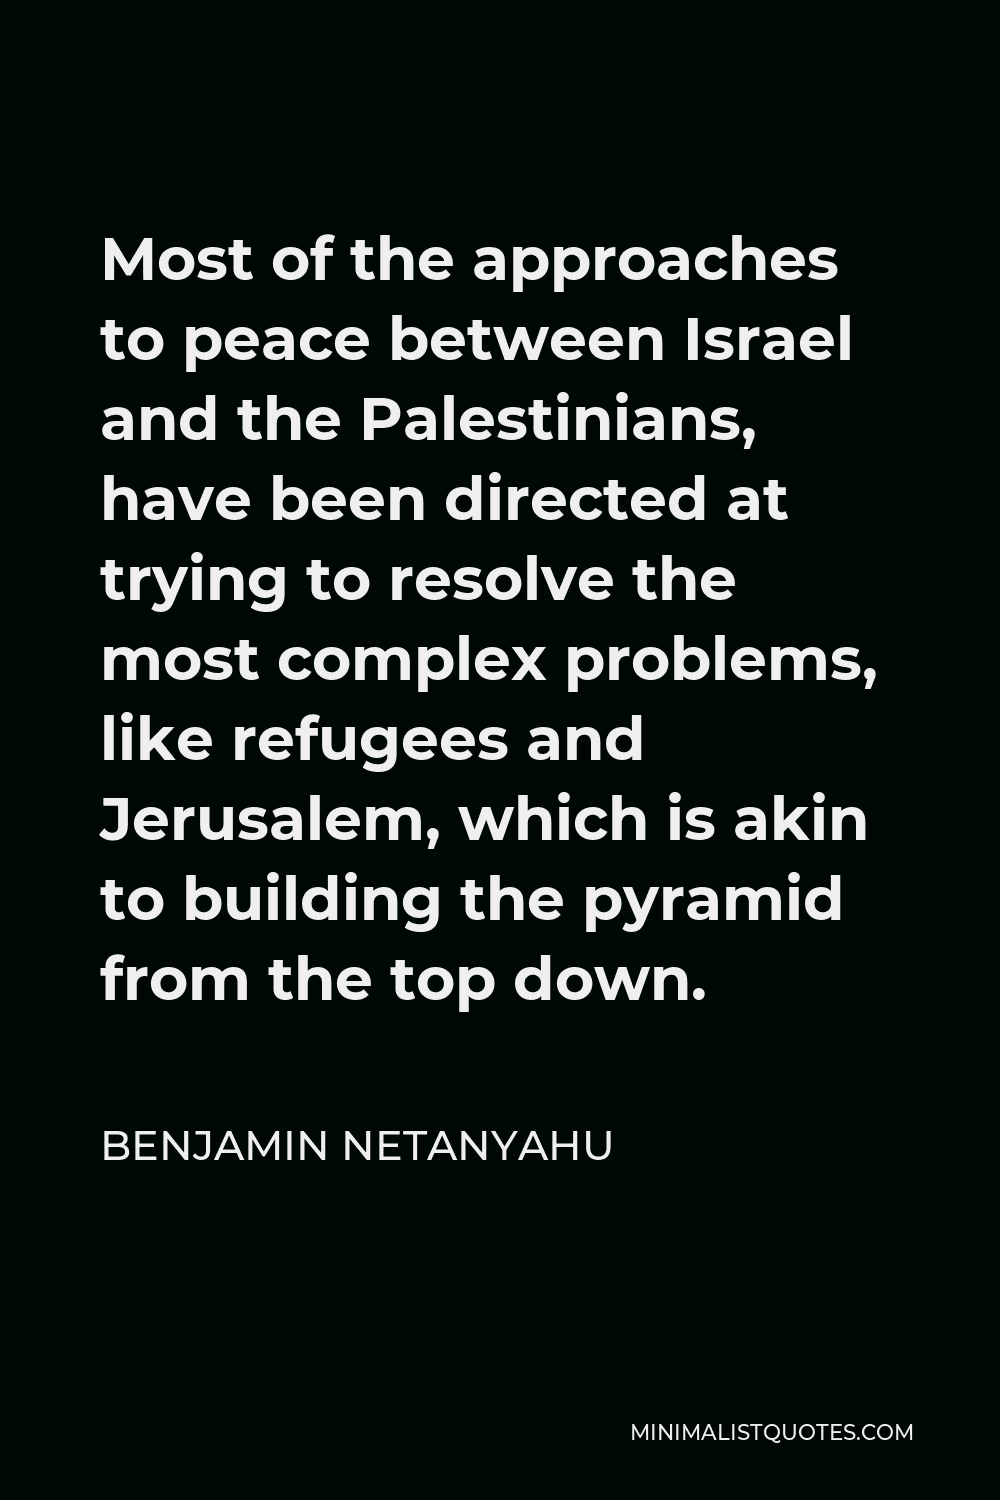 Benjamin Netanyahu Quote - Most of the approaches to peace between Israel and the Palestinians, have been directed at trying to resolve the most complex problems, like refugees and Jerusalem, which is akin to building the pyramid from the top down.